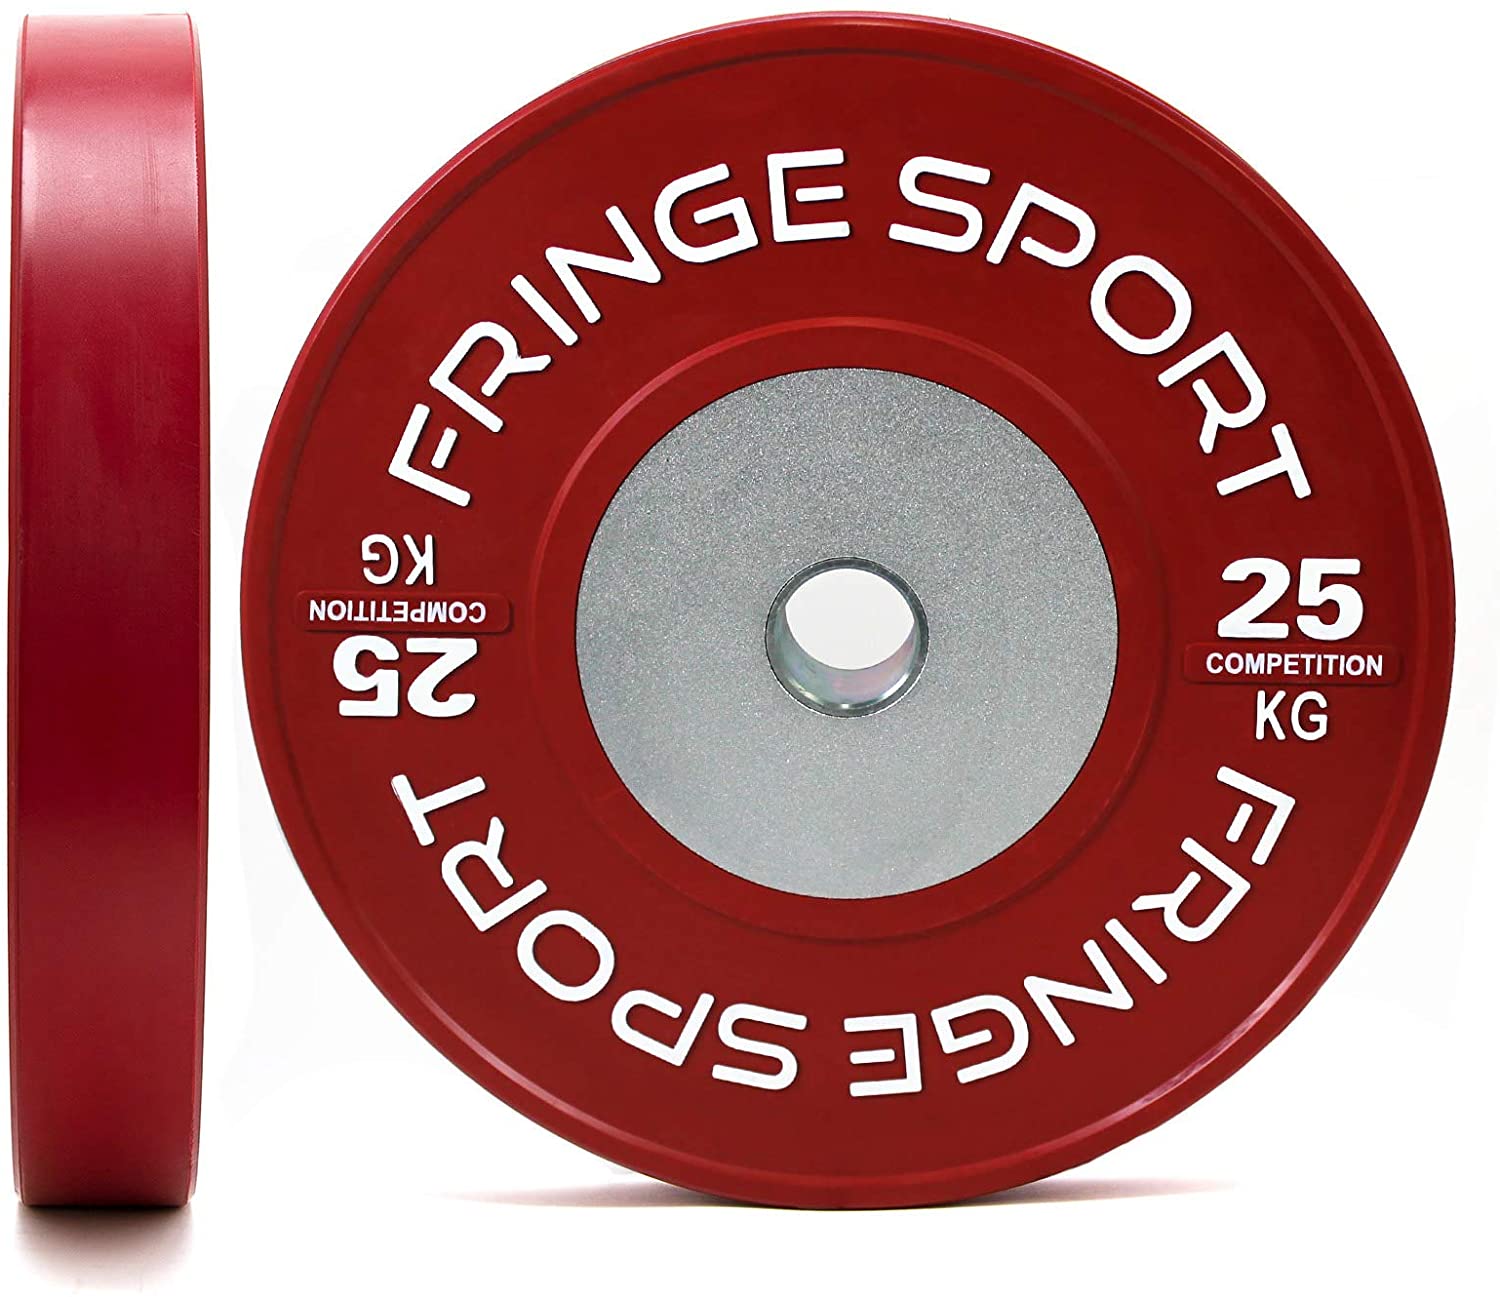 Color Competition Bumper Plate Pairs for Olympic Weightlifting in Kg